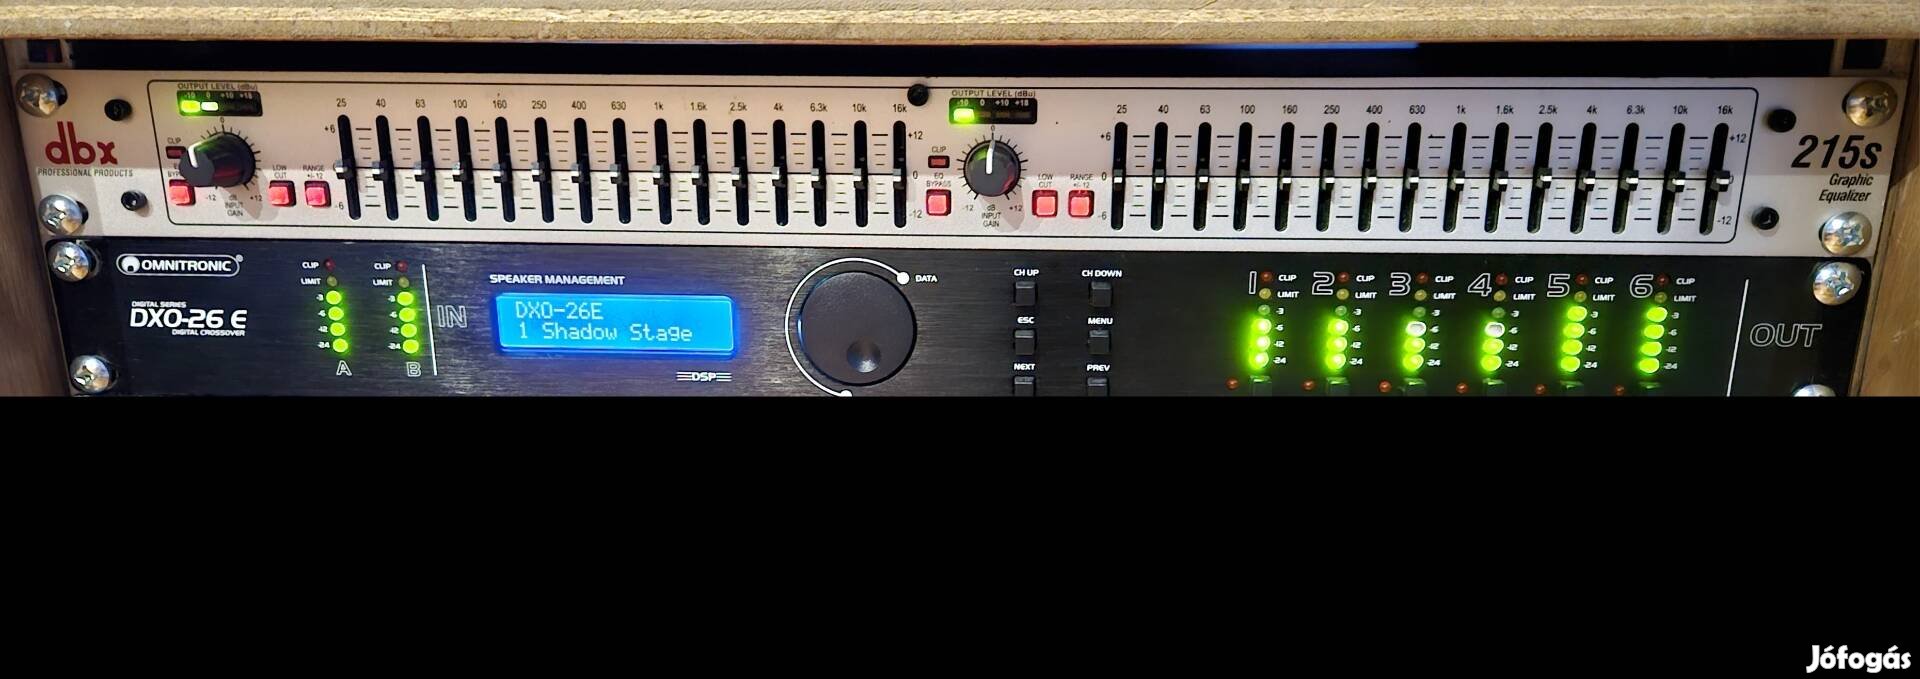 DBX 215S Graphic Equalizer